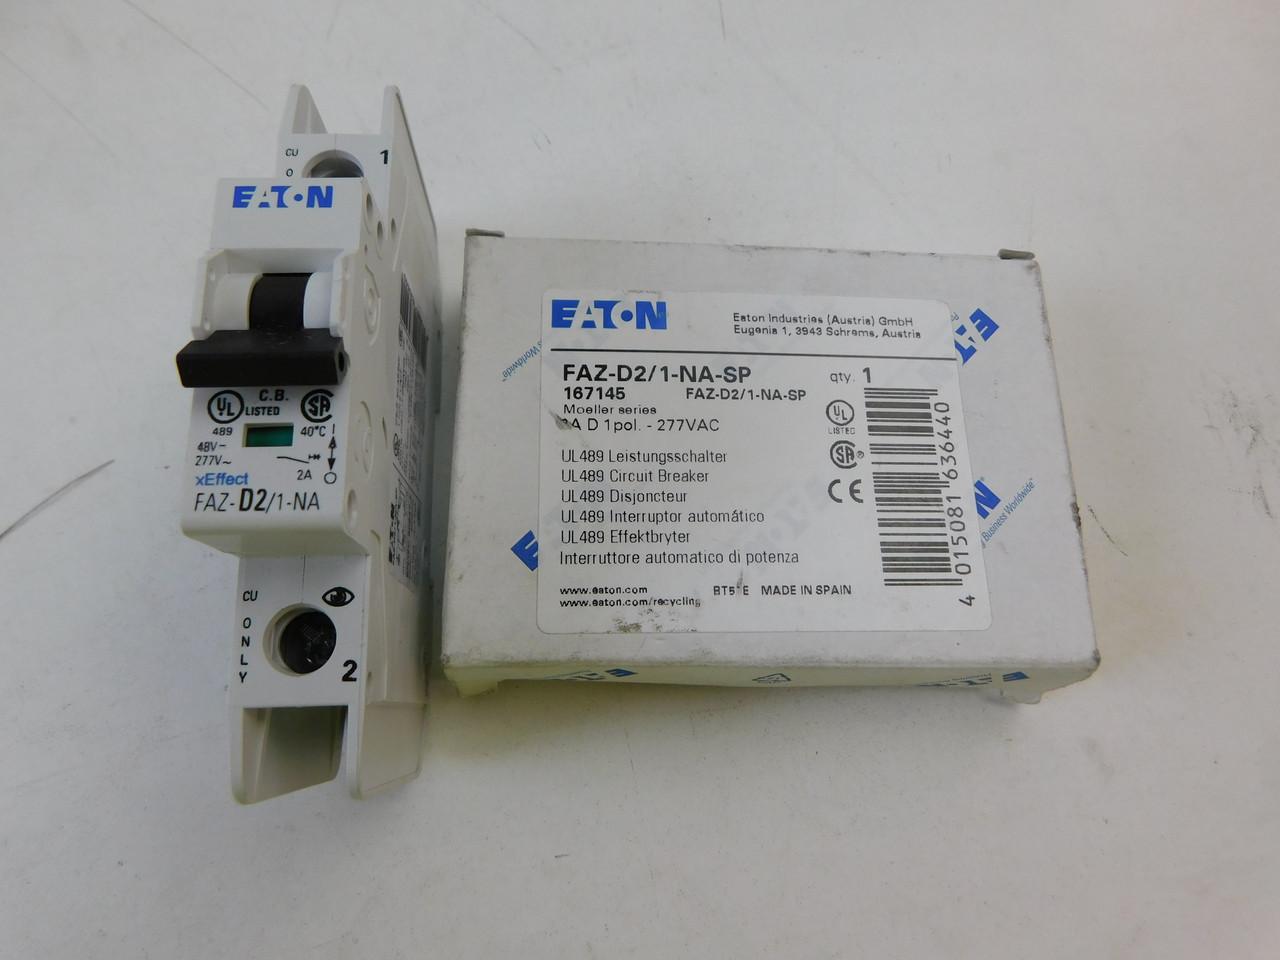 Eaton FAZ-D2/1-NA-SP Eaton FAZ branch protector,UL 489 Industrial miniature circuit breaker - supplementary protector,Single package,High levels of inrush current are expected,2 A,10 kAIC,Single-pole,277 V,10-20X /n,Q38,50-60 Hz,Screw terminals,D Curve